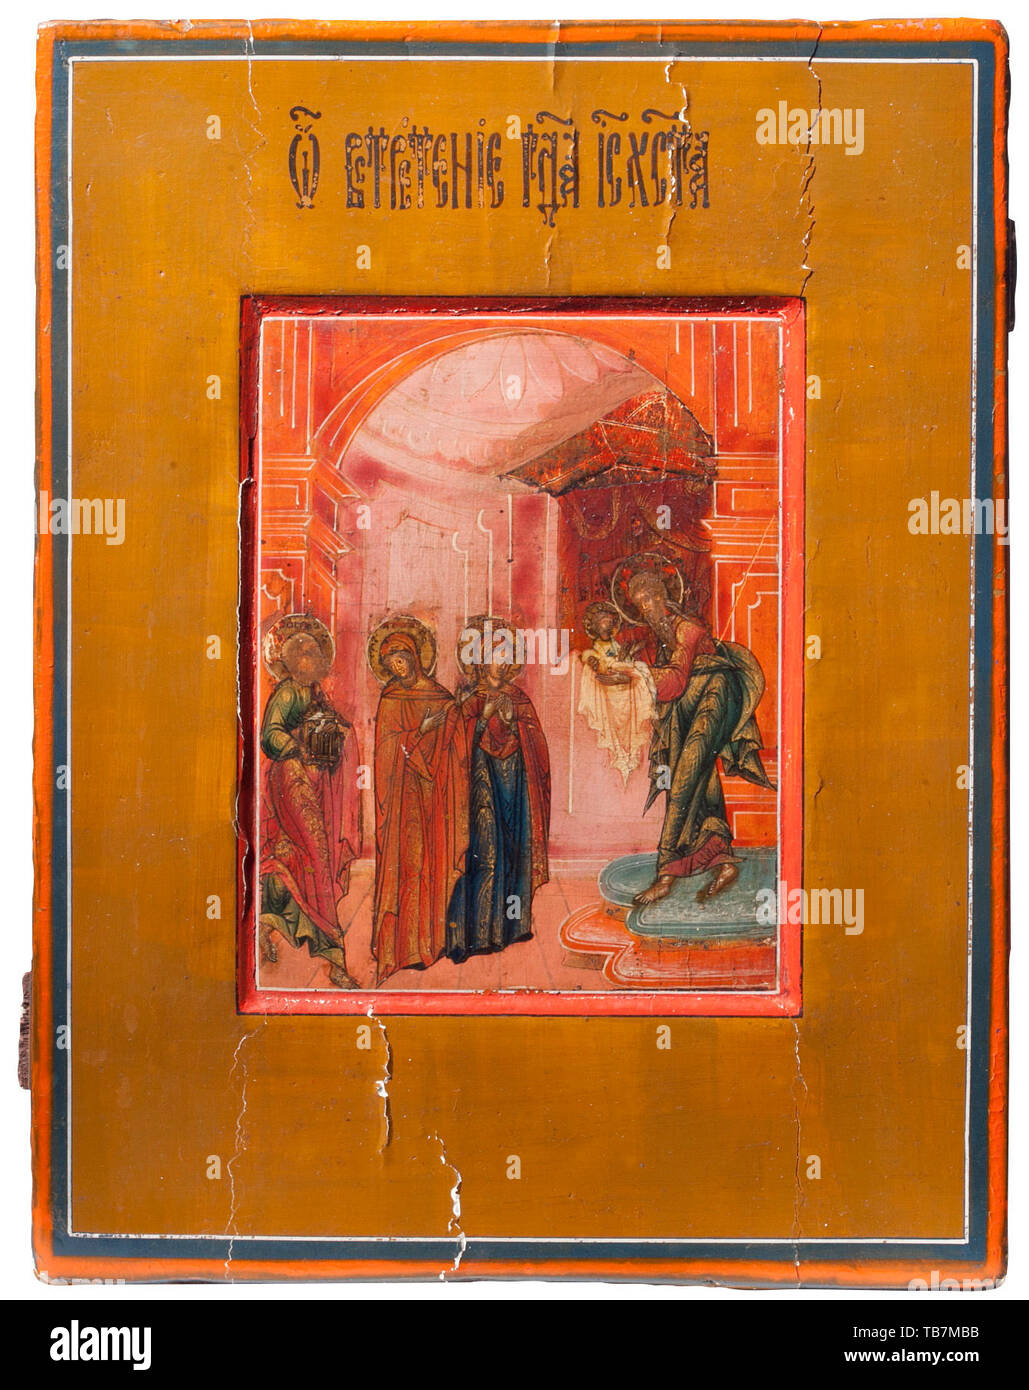 A Russian icon 'Presentation of Jesus at the Temple', 19th century, Egg tempera on wood with a kovcheg depicting Jesus in the temple as a child. Mary and Joseph are present with gifts for the priest, and are also accompanied by Anne, the prophetess and mother of Mary. USA-lot. historic, historical 19th century, Additional-Rights-Clearance-Info-Not-Available Stock Photo